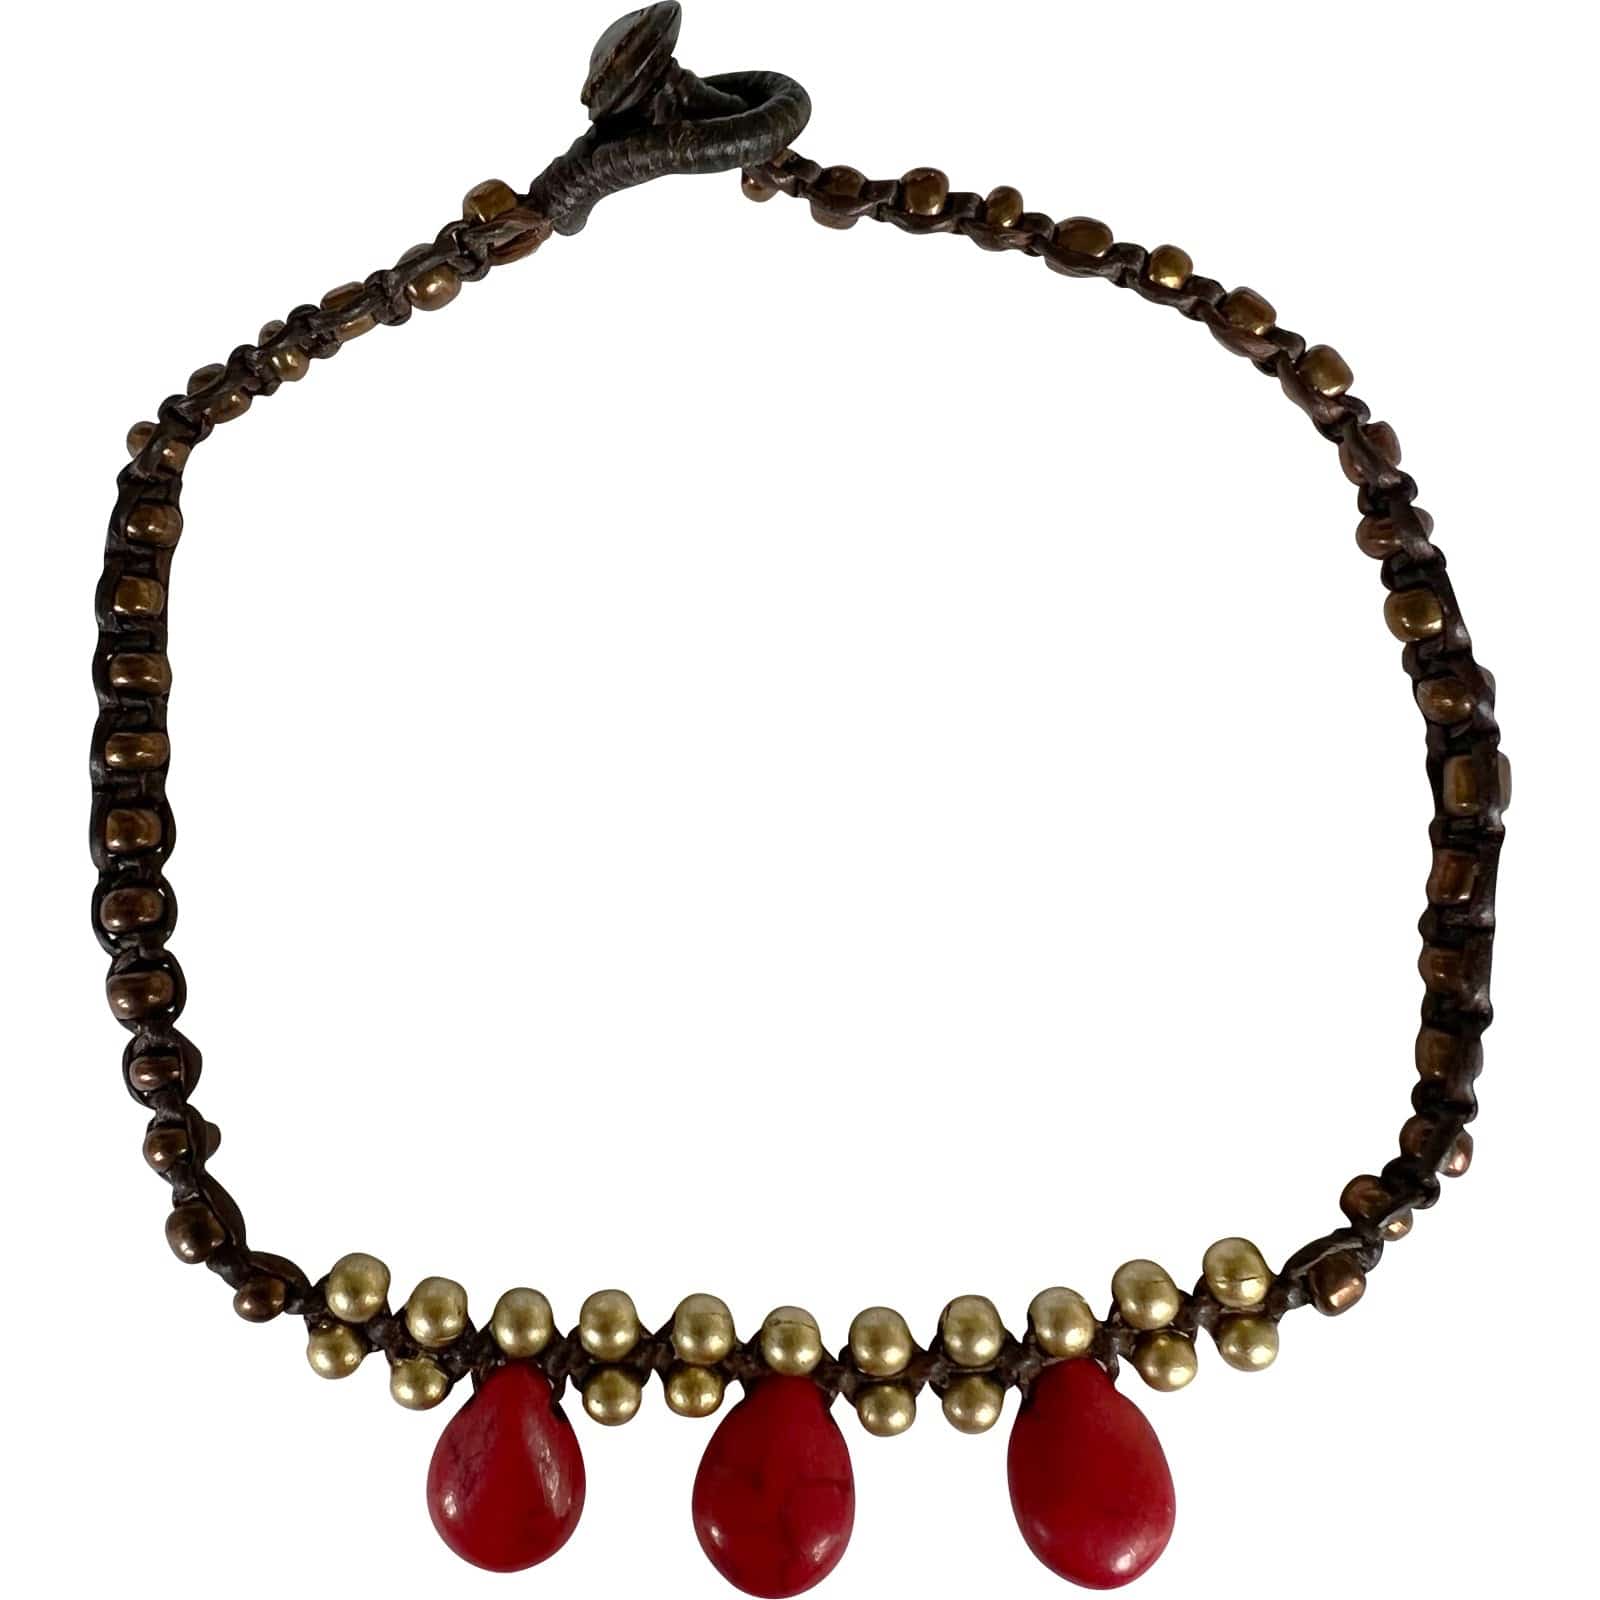 Black Brown Gold Red Beads Anklet Foot Chain Ankle Bracelet Women Girl Jewellery